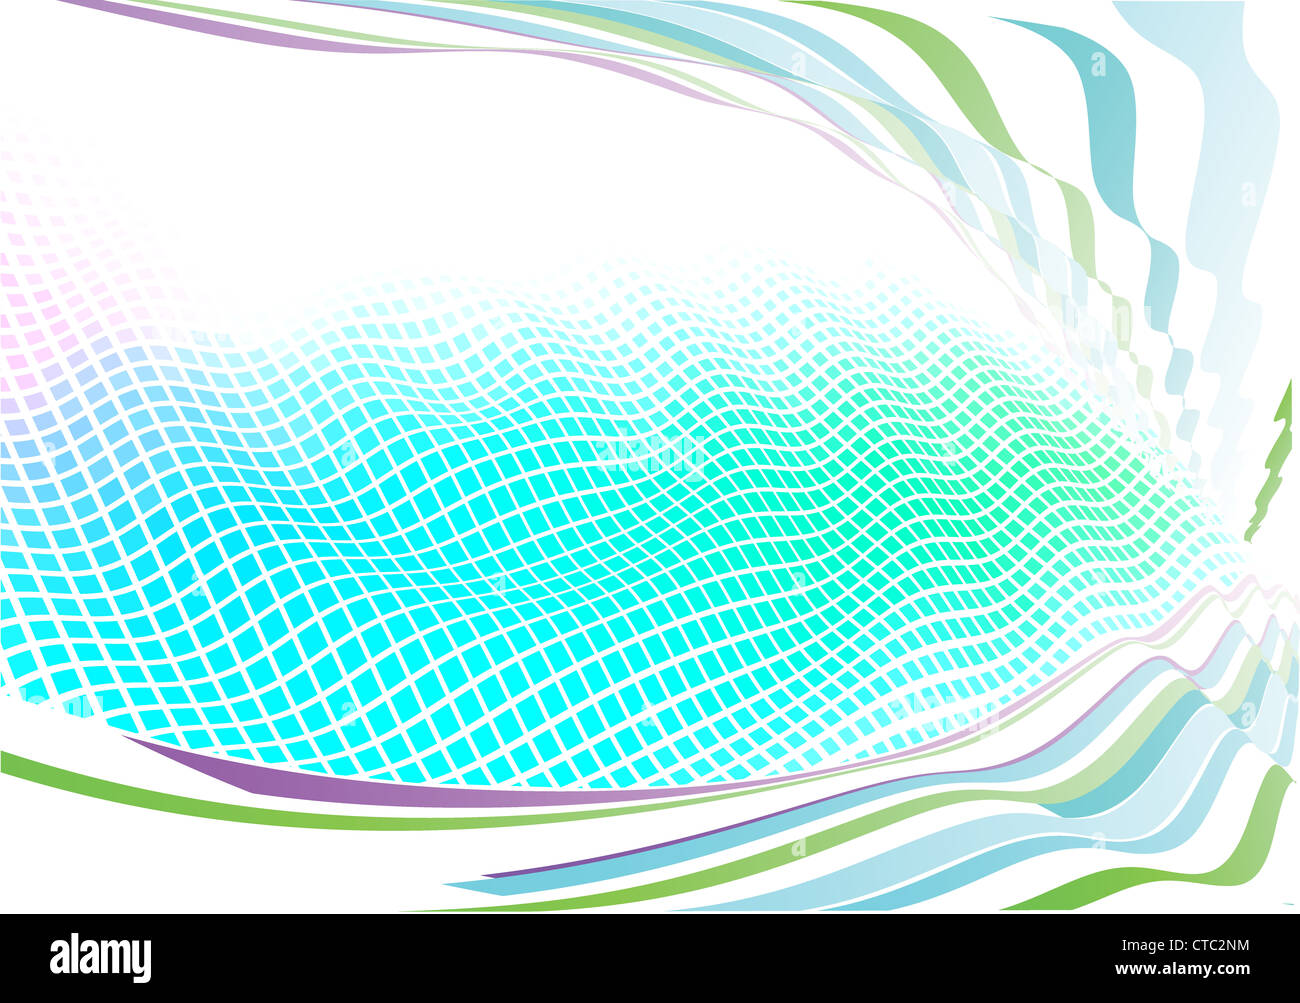 Vector illustration funky abstract background made geometric squares curved lines Great backgrounds layering over other images Stock Photo